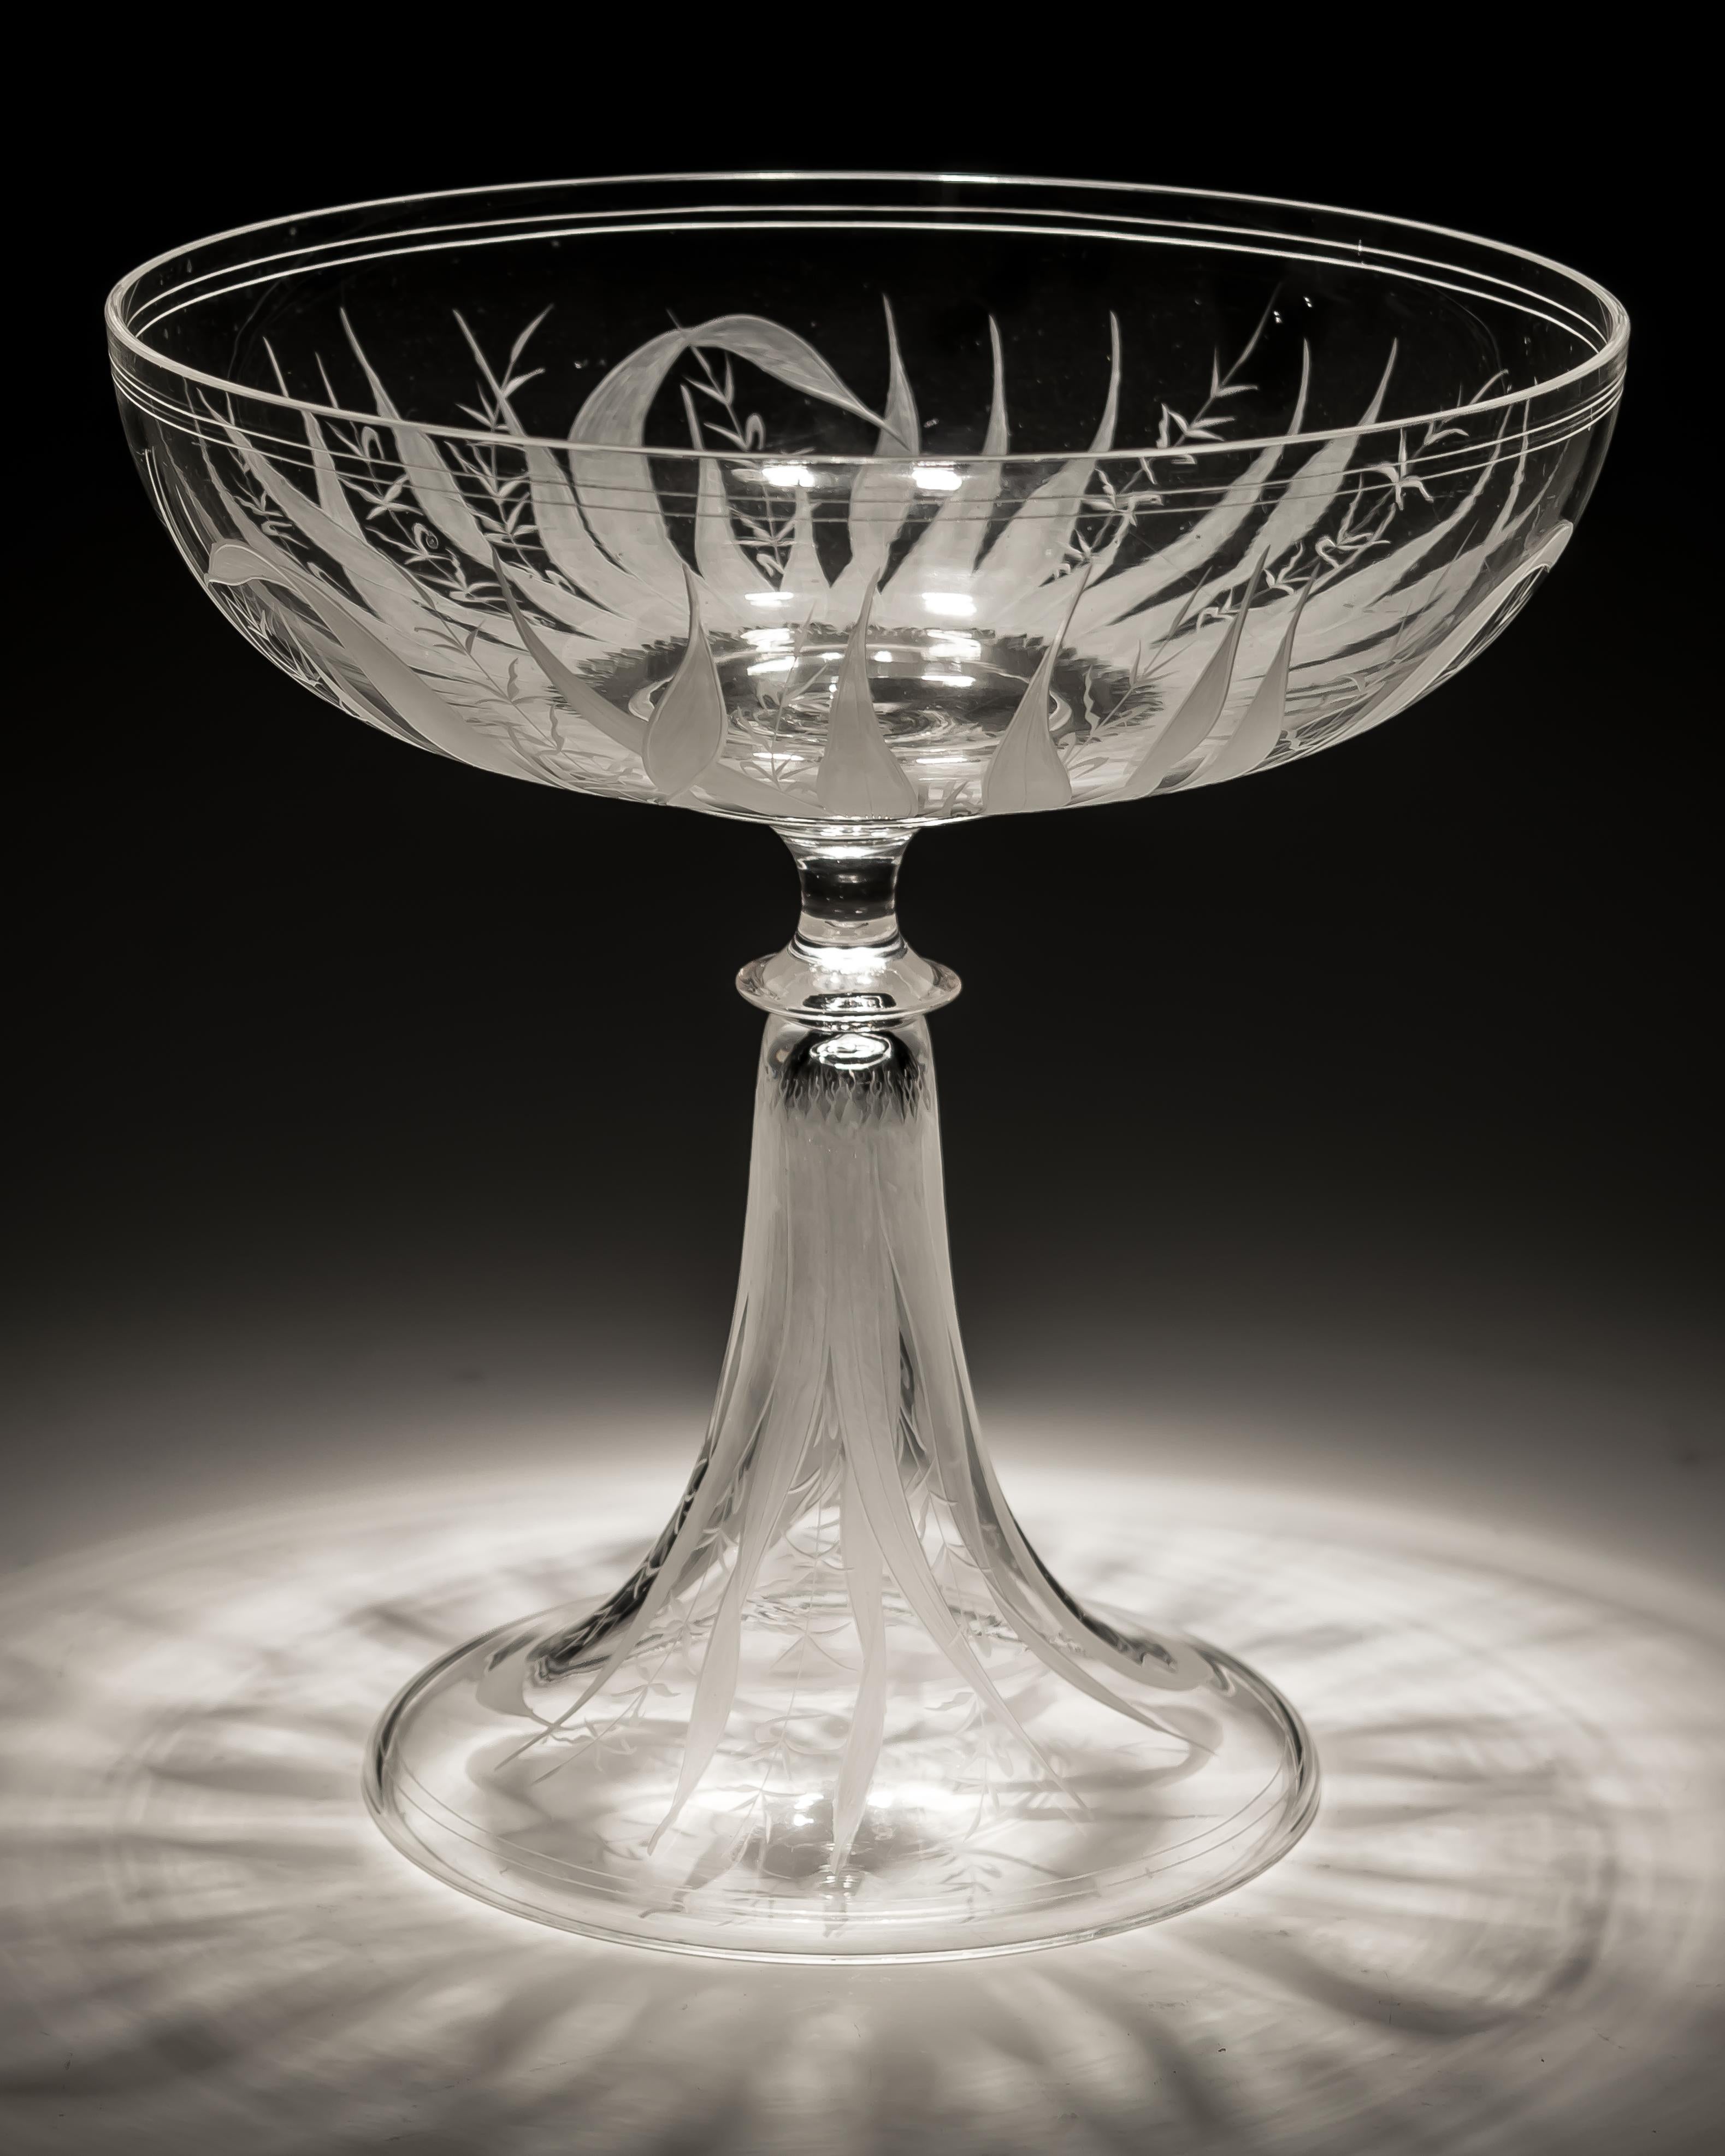 A finely engraved tazza with reeds and rushes.